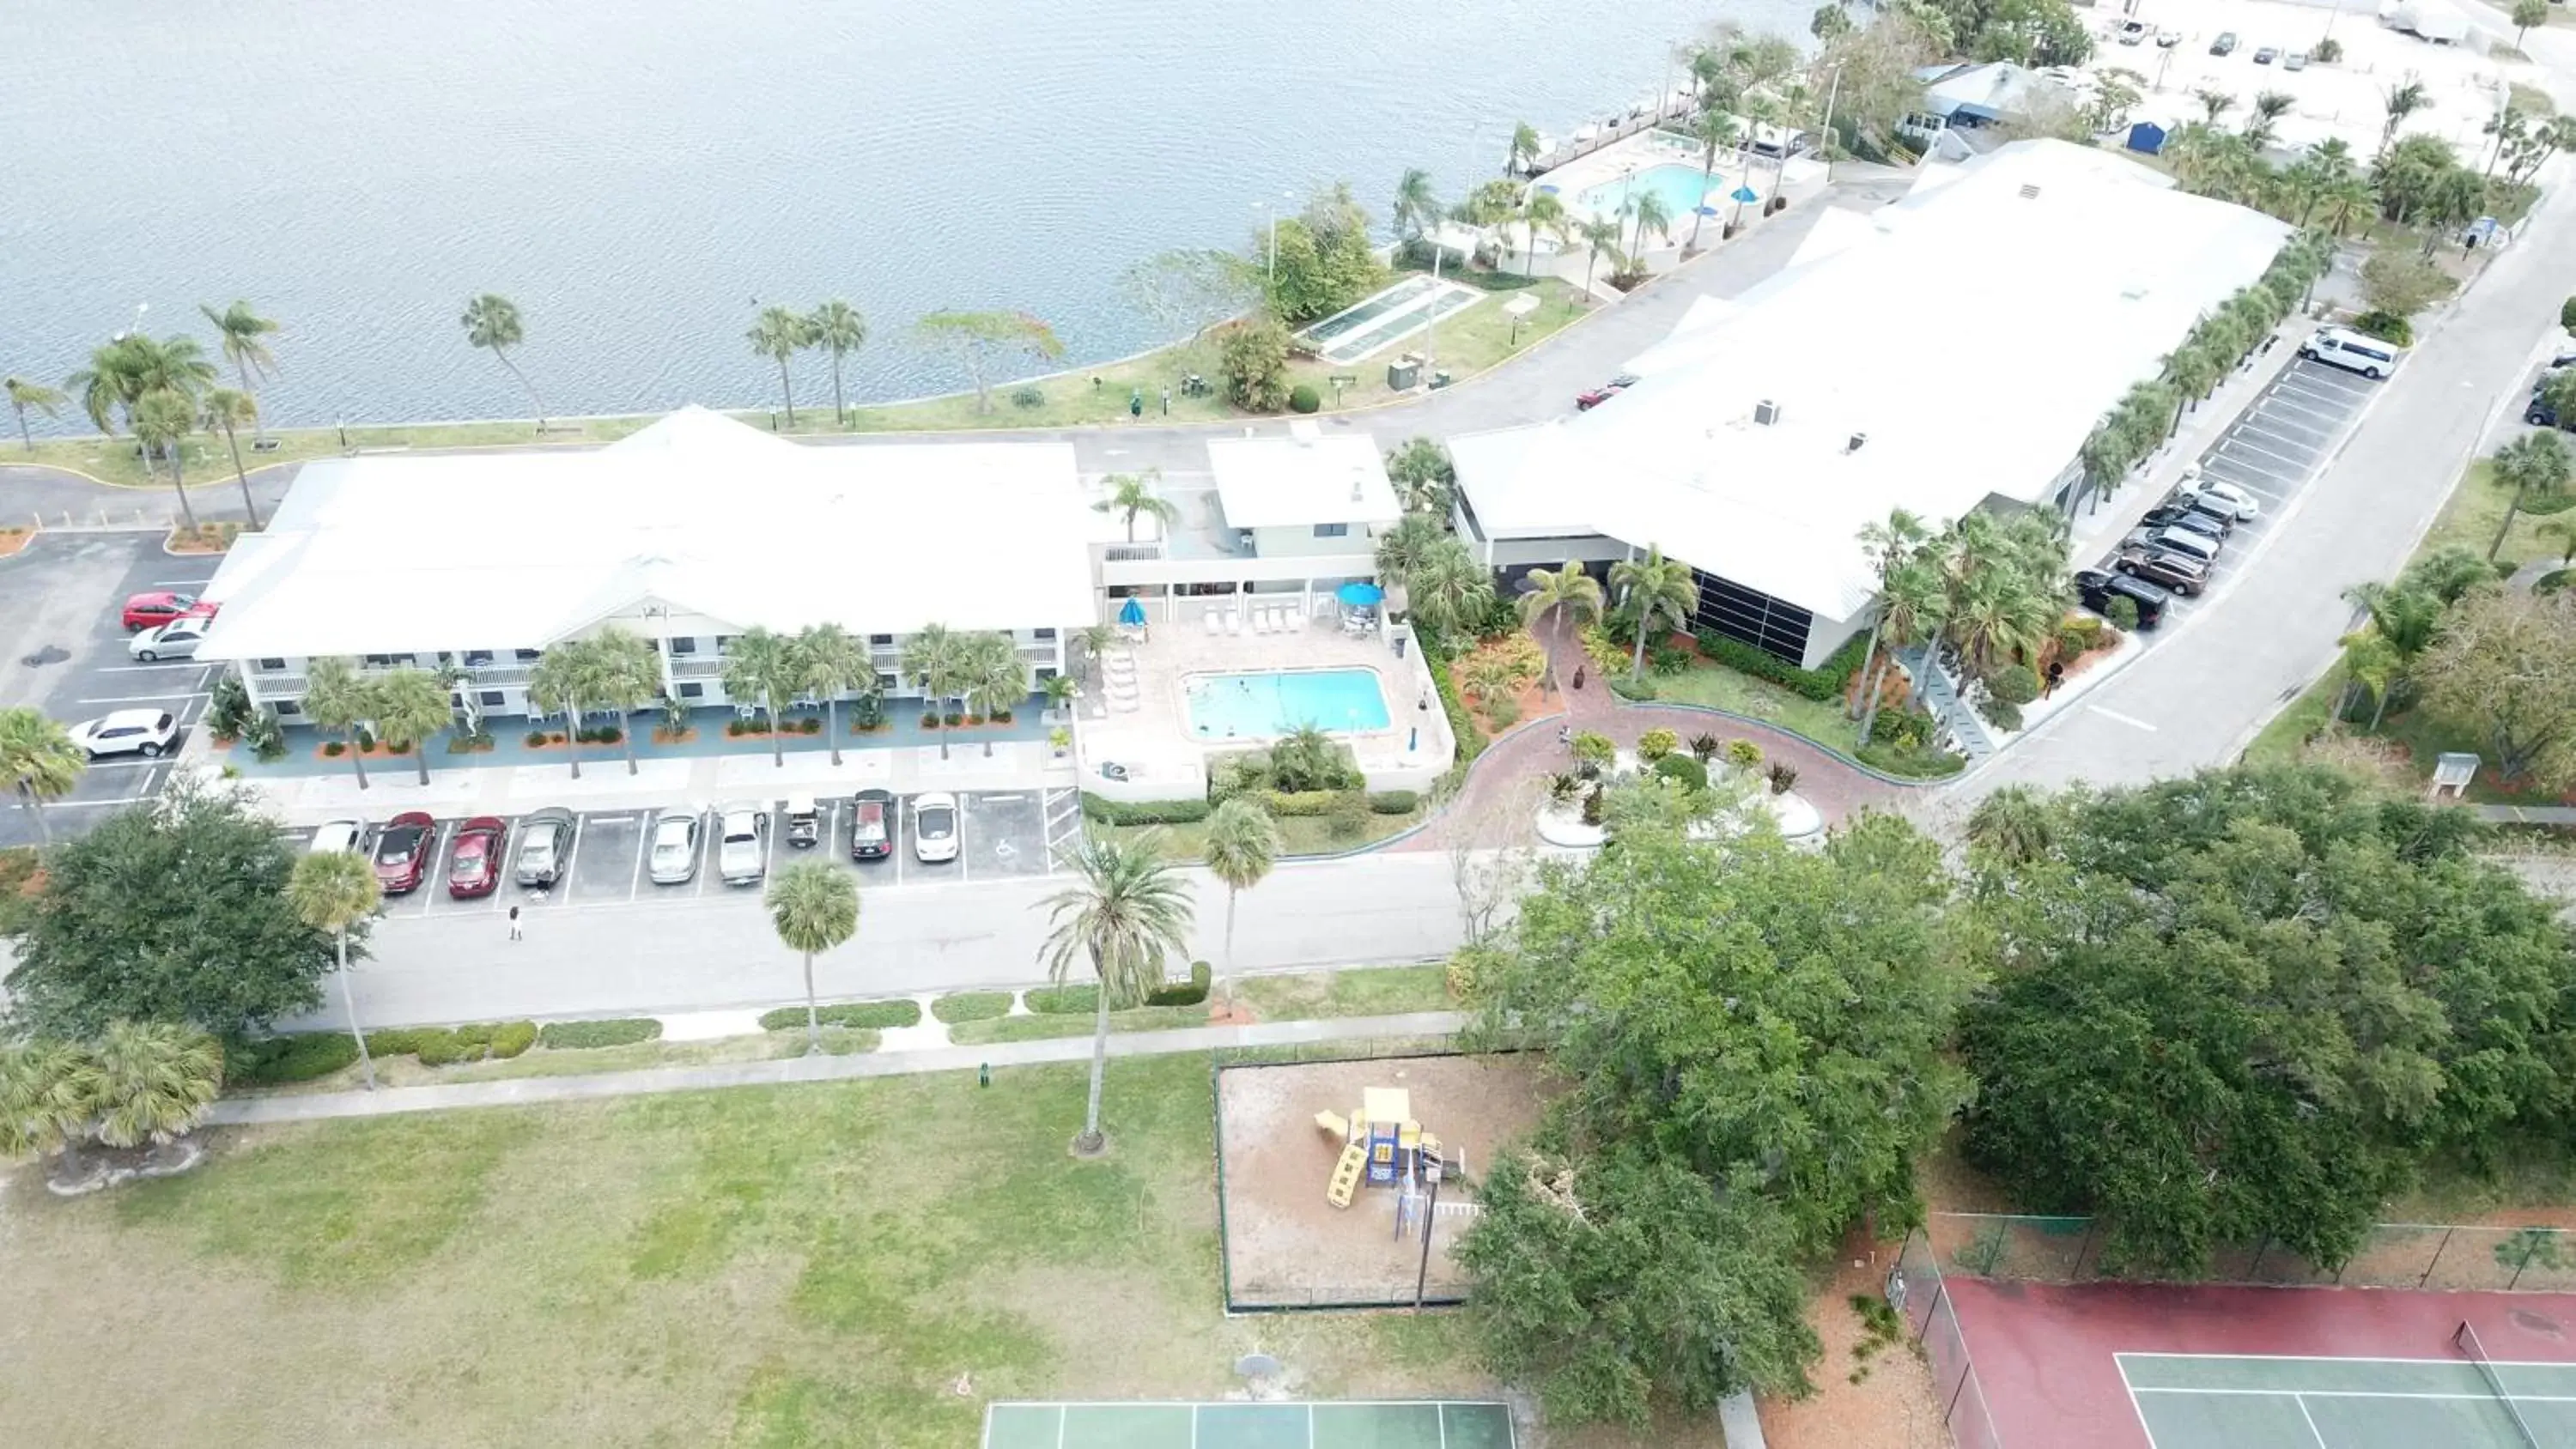 Bird's-eye View in DOLPHINS, BEACH step away, WIFI, FREE PARKING,POOLS, JACUZZI